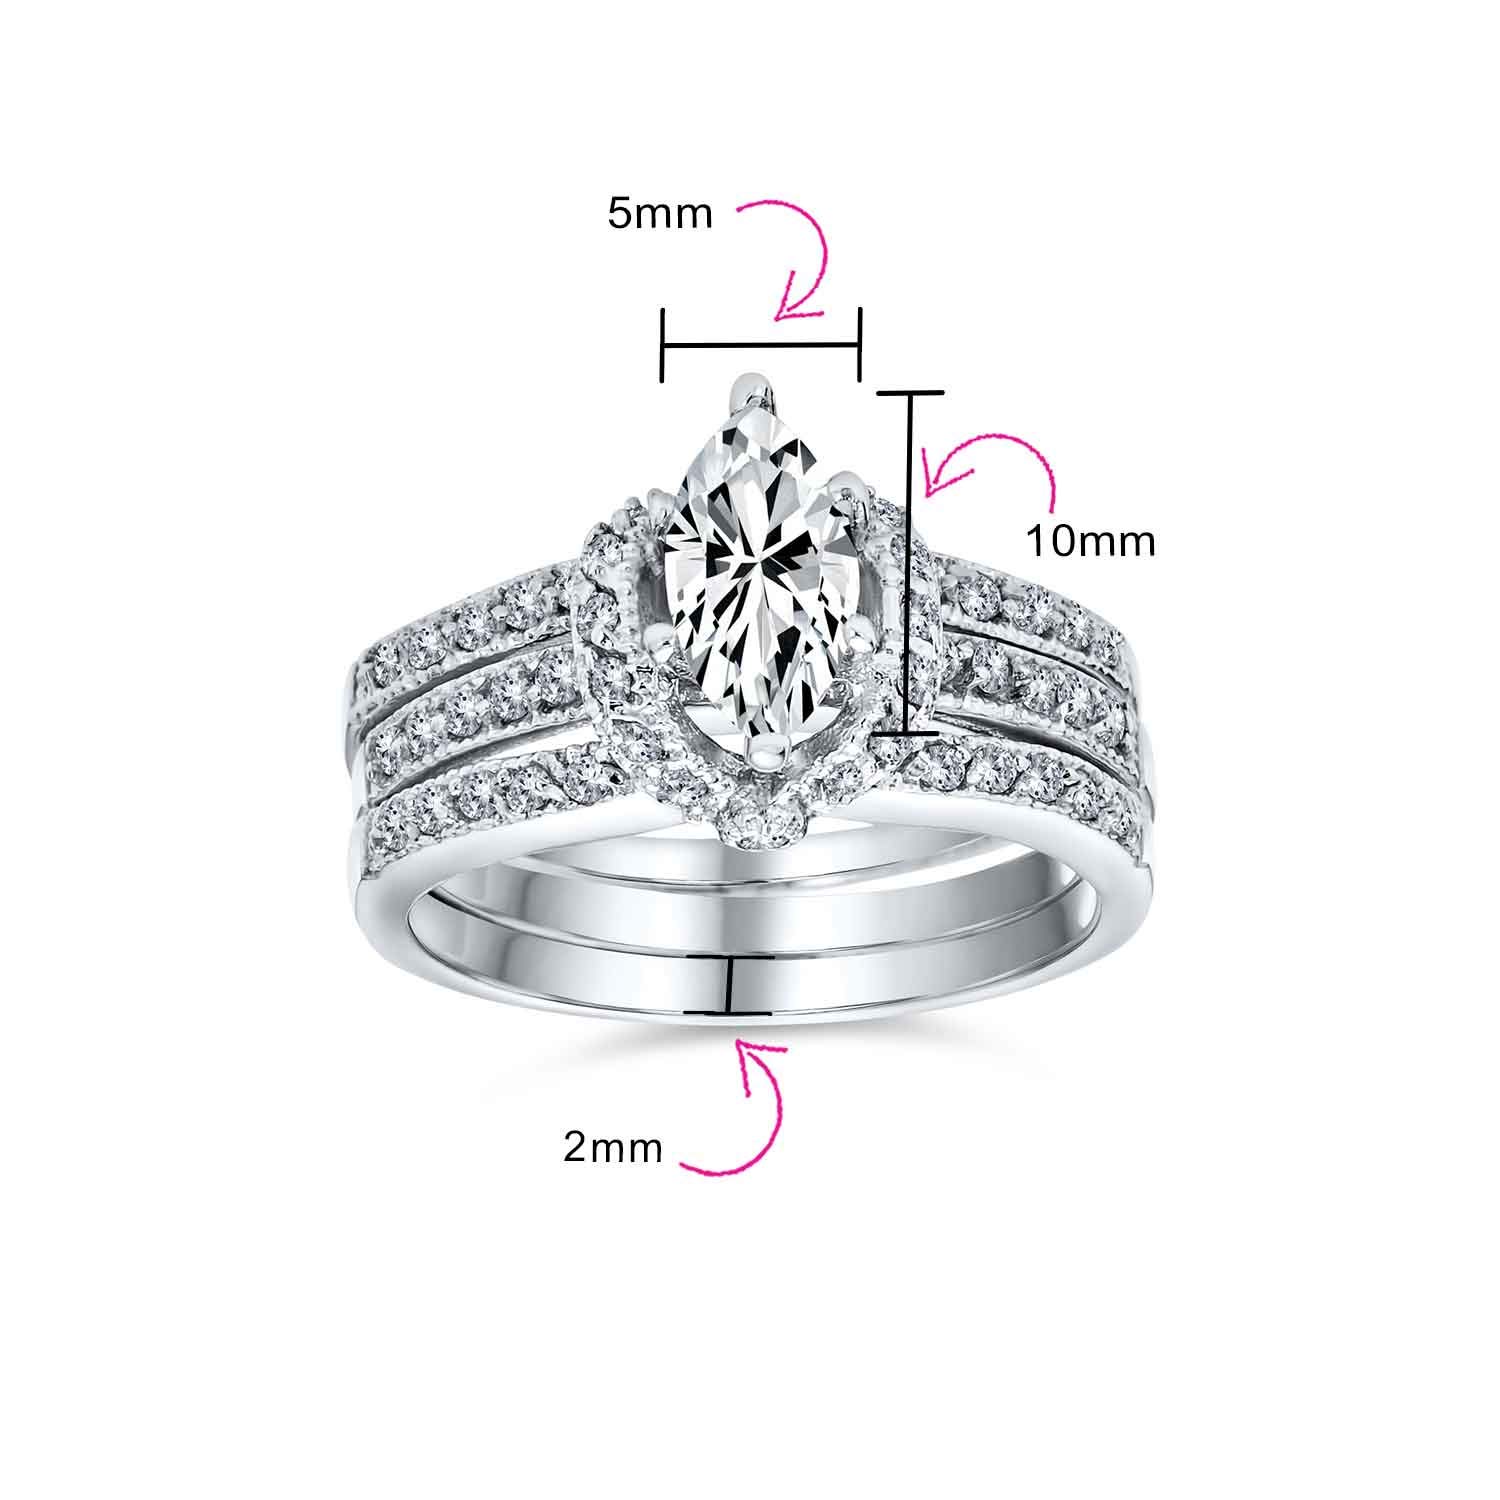 Personalize 1.5-2.5CT Cubic Zirconia Enhancer Guard Round Solitaire Halo Marquise AAA CZ Baguette Band Inset Anniversary Statement Engagement Ring Wedding Set .925 Sterling Silver Customizable